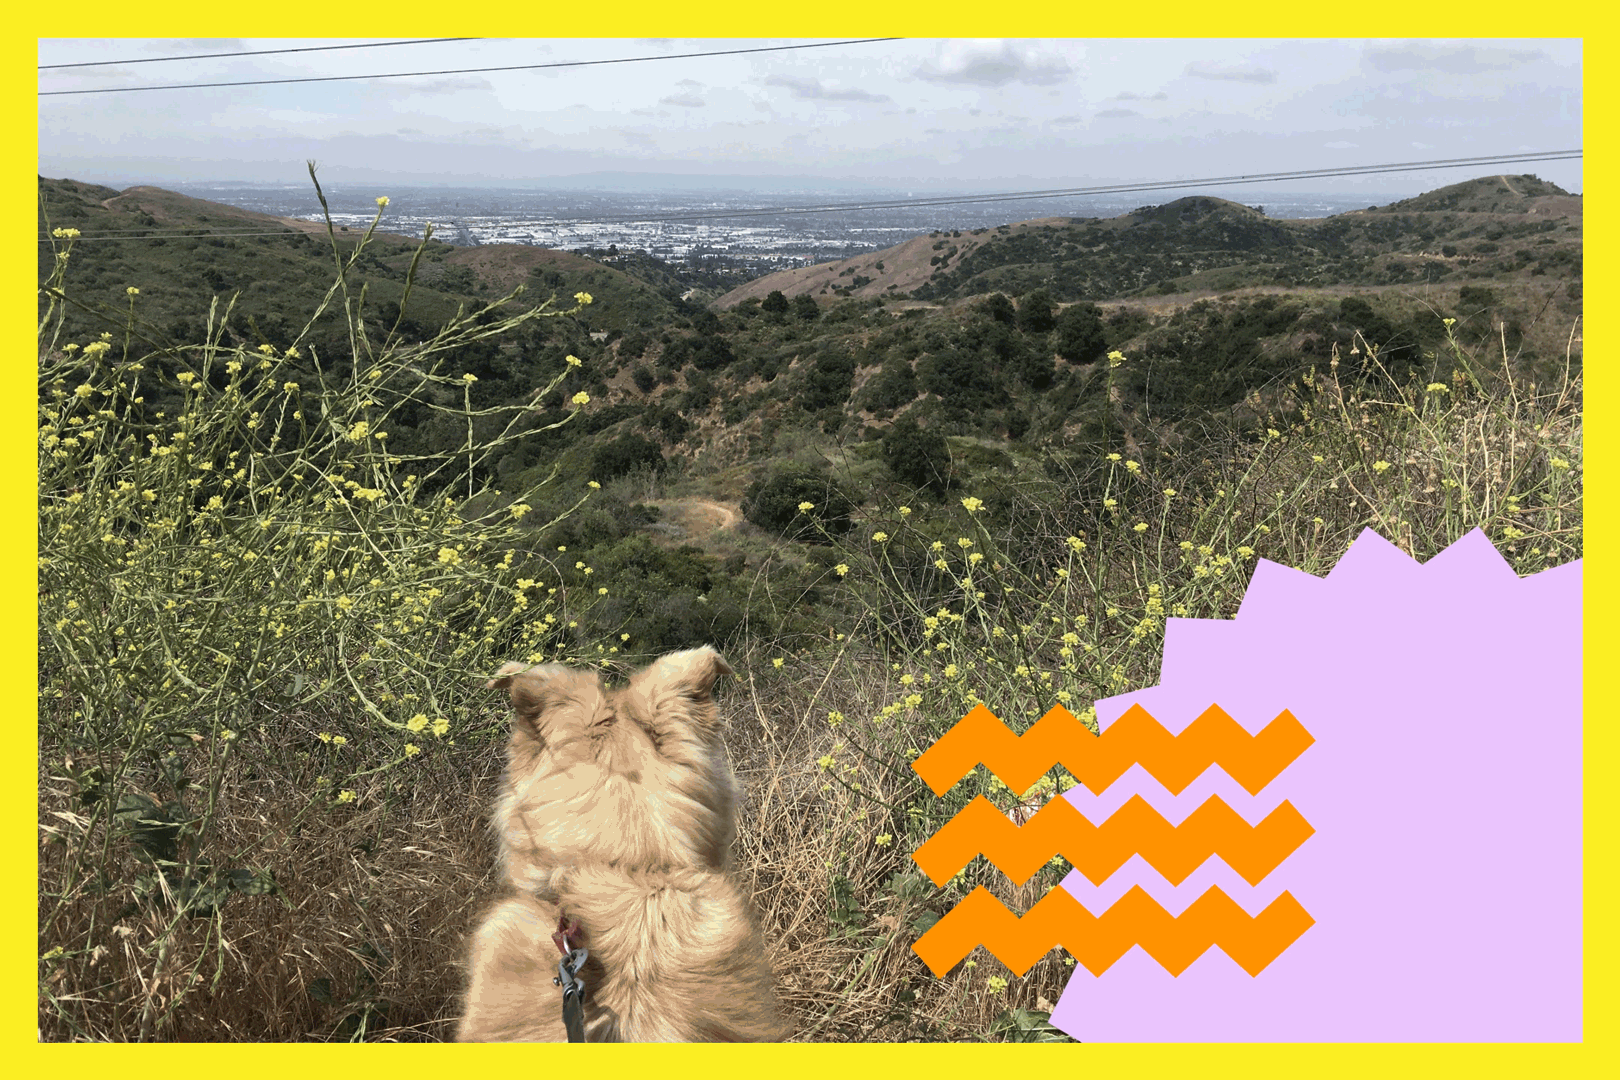 The author's dog, Daysi, enjoying the view from the trail.